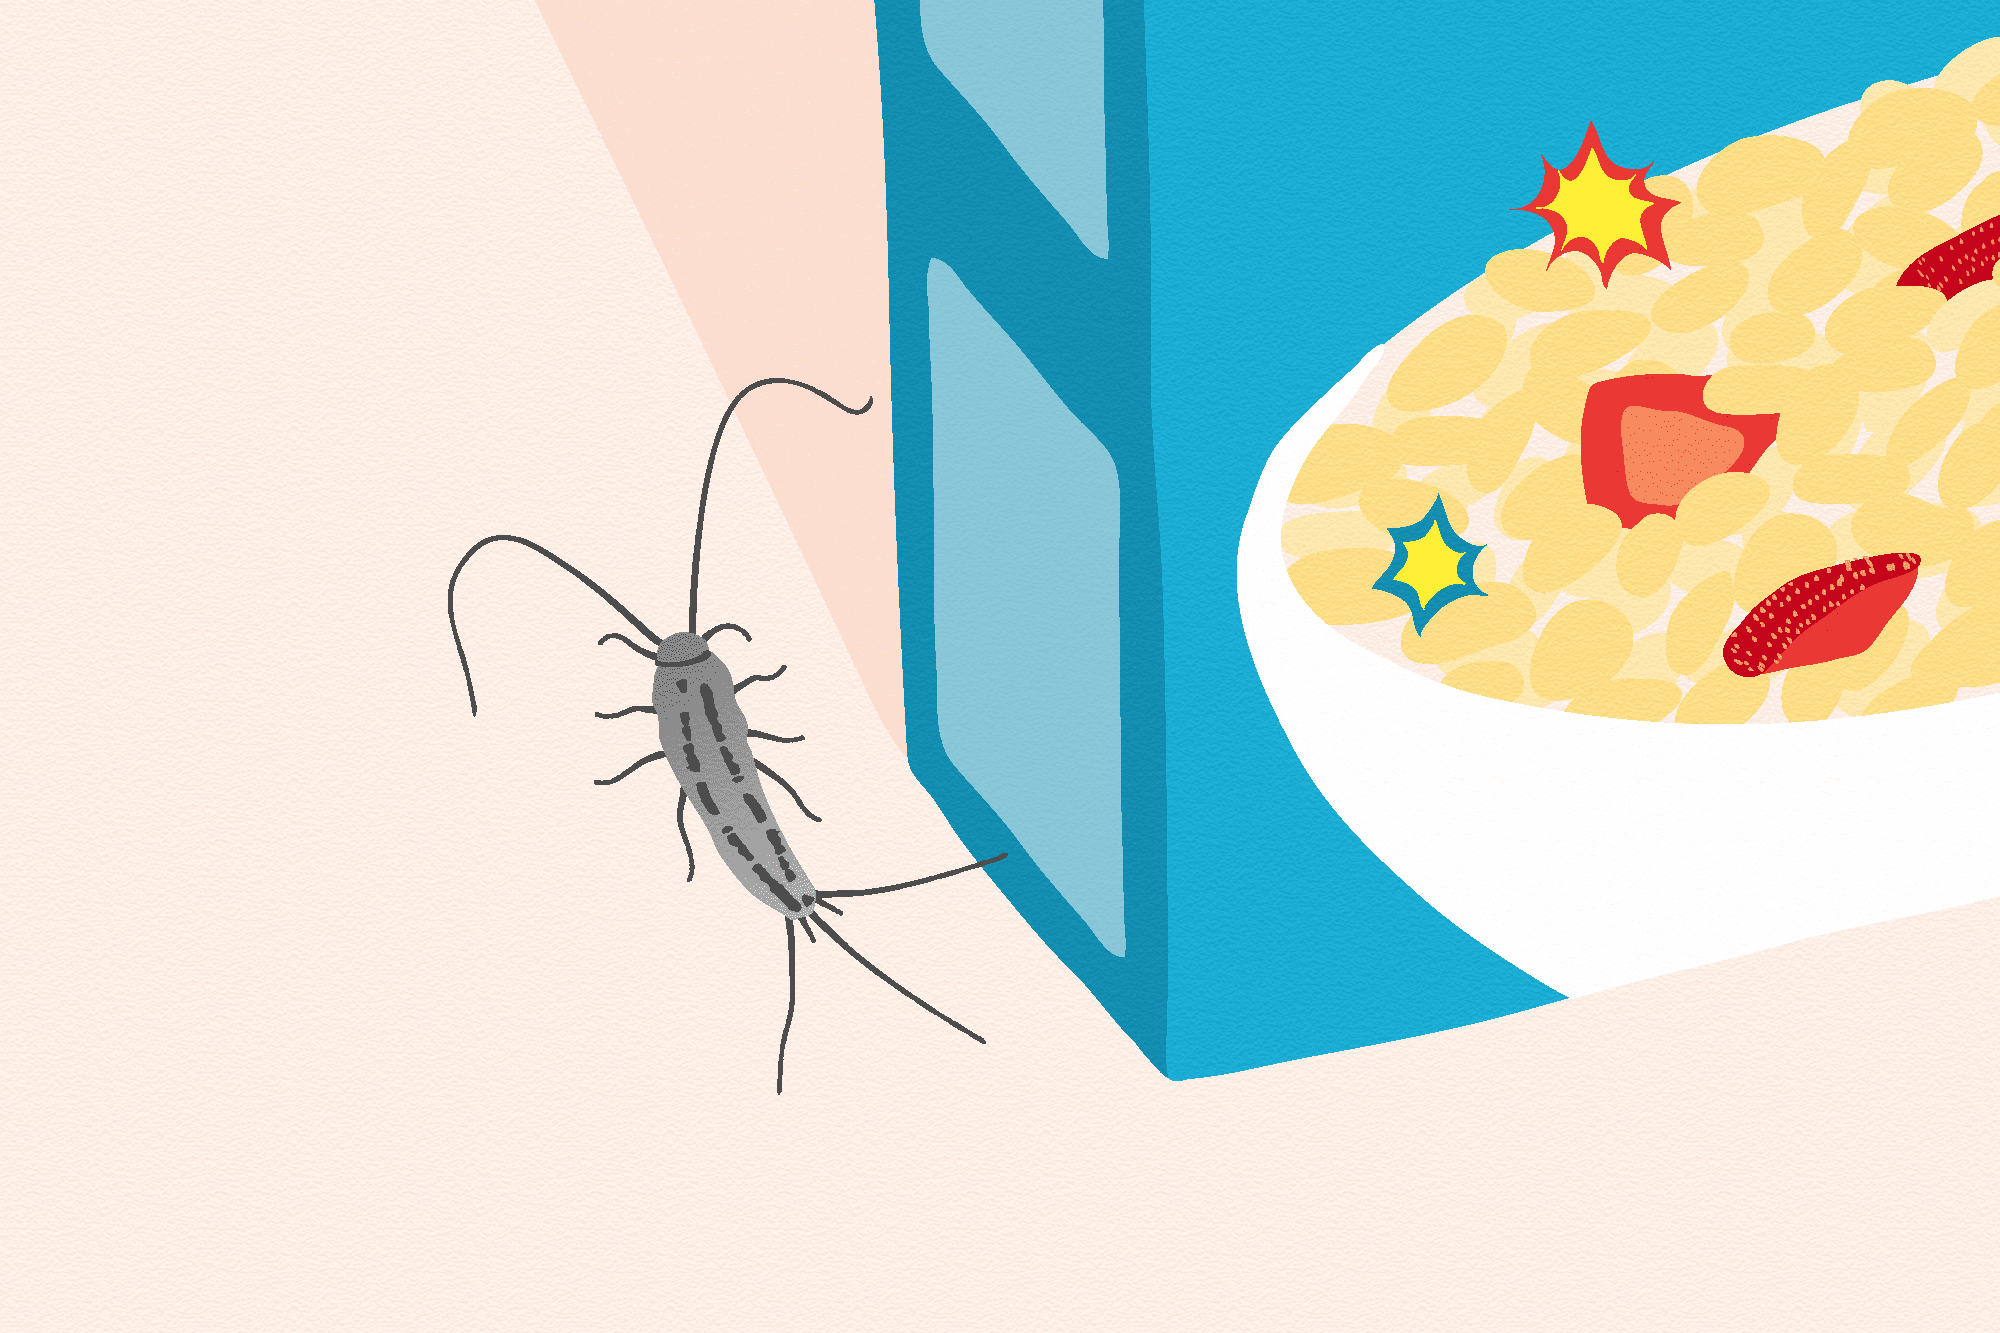 Unwelcome Dinner Guests: How to Get Rid of Pantry Bugs for Good